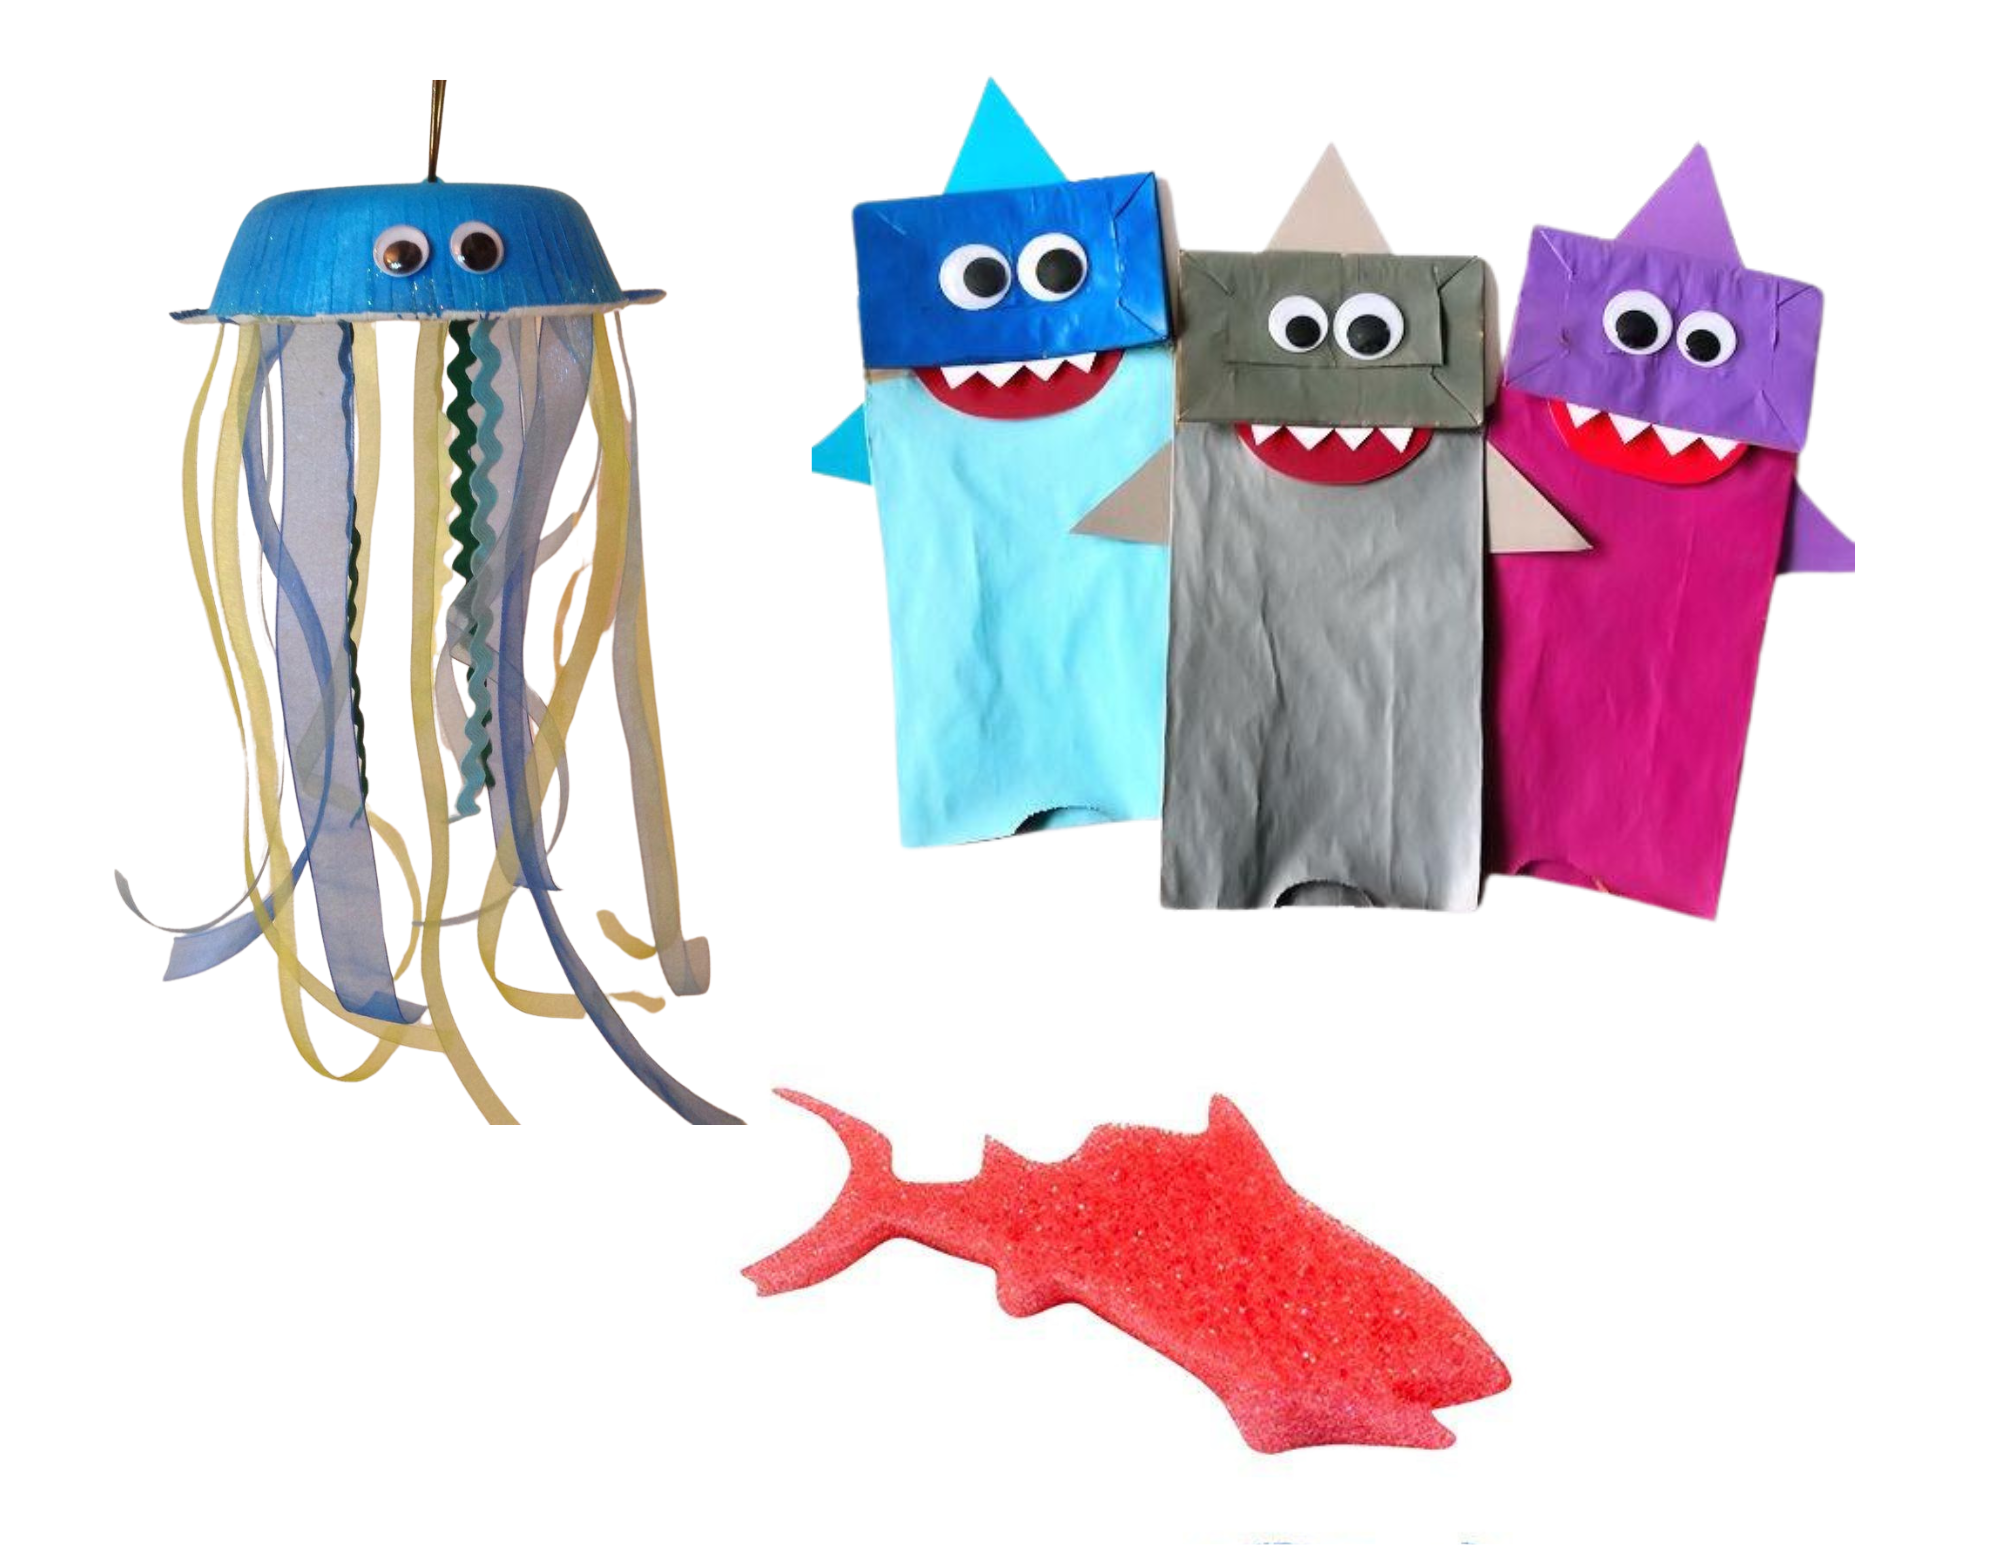 image of jelly fish craft, paper bag puppets, and fish sponge